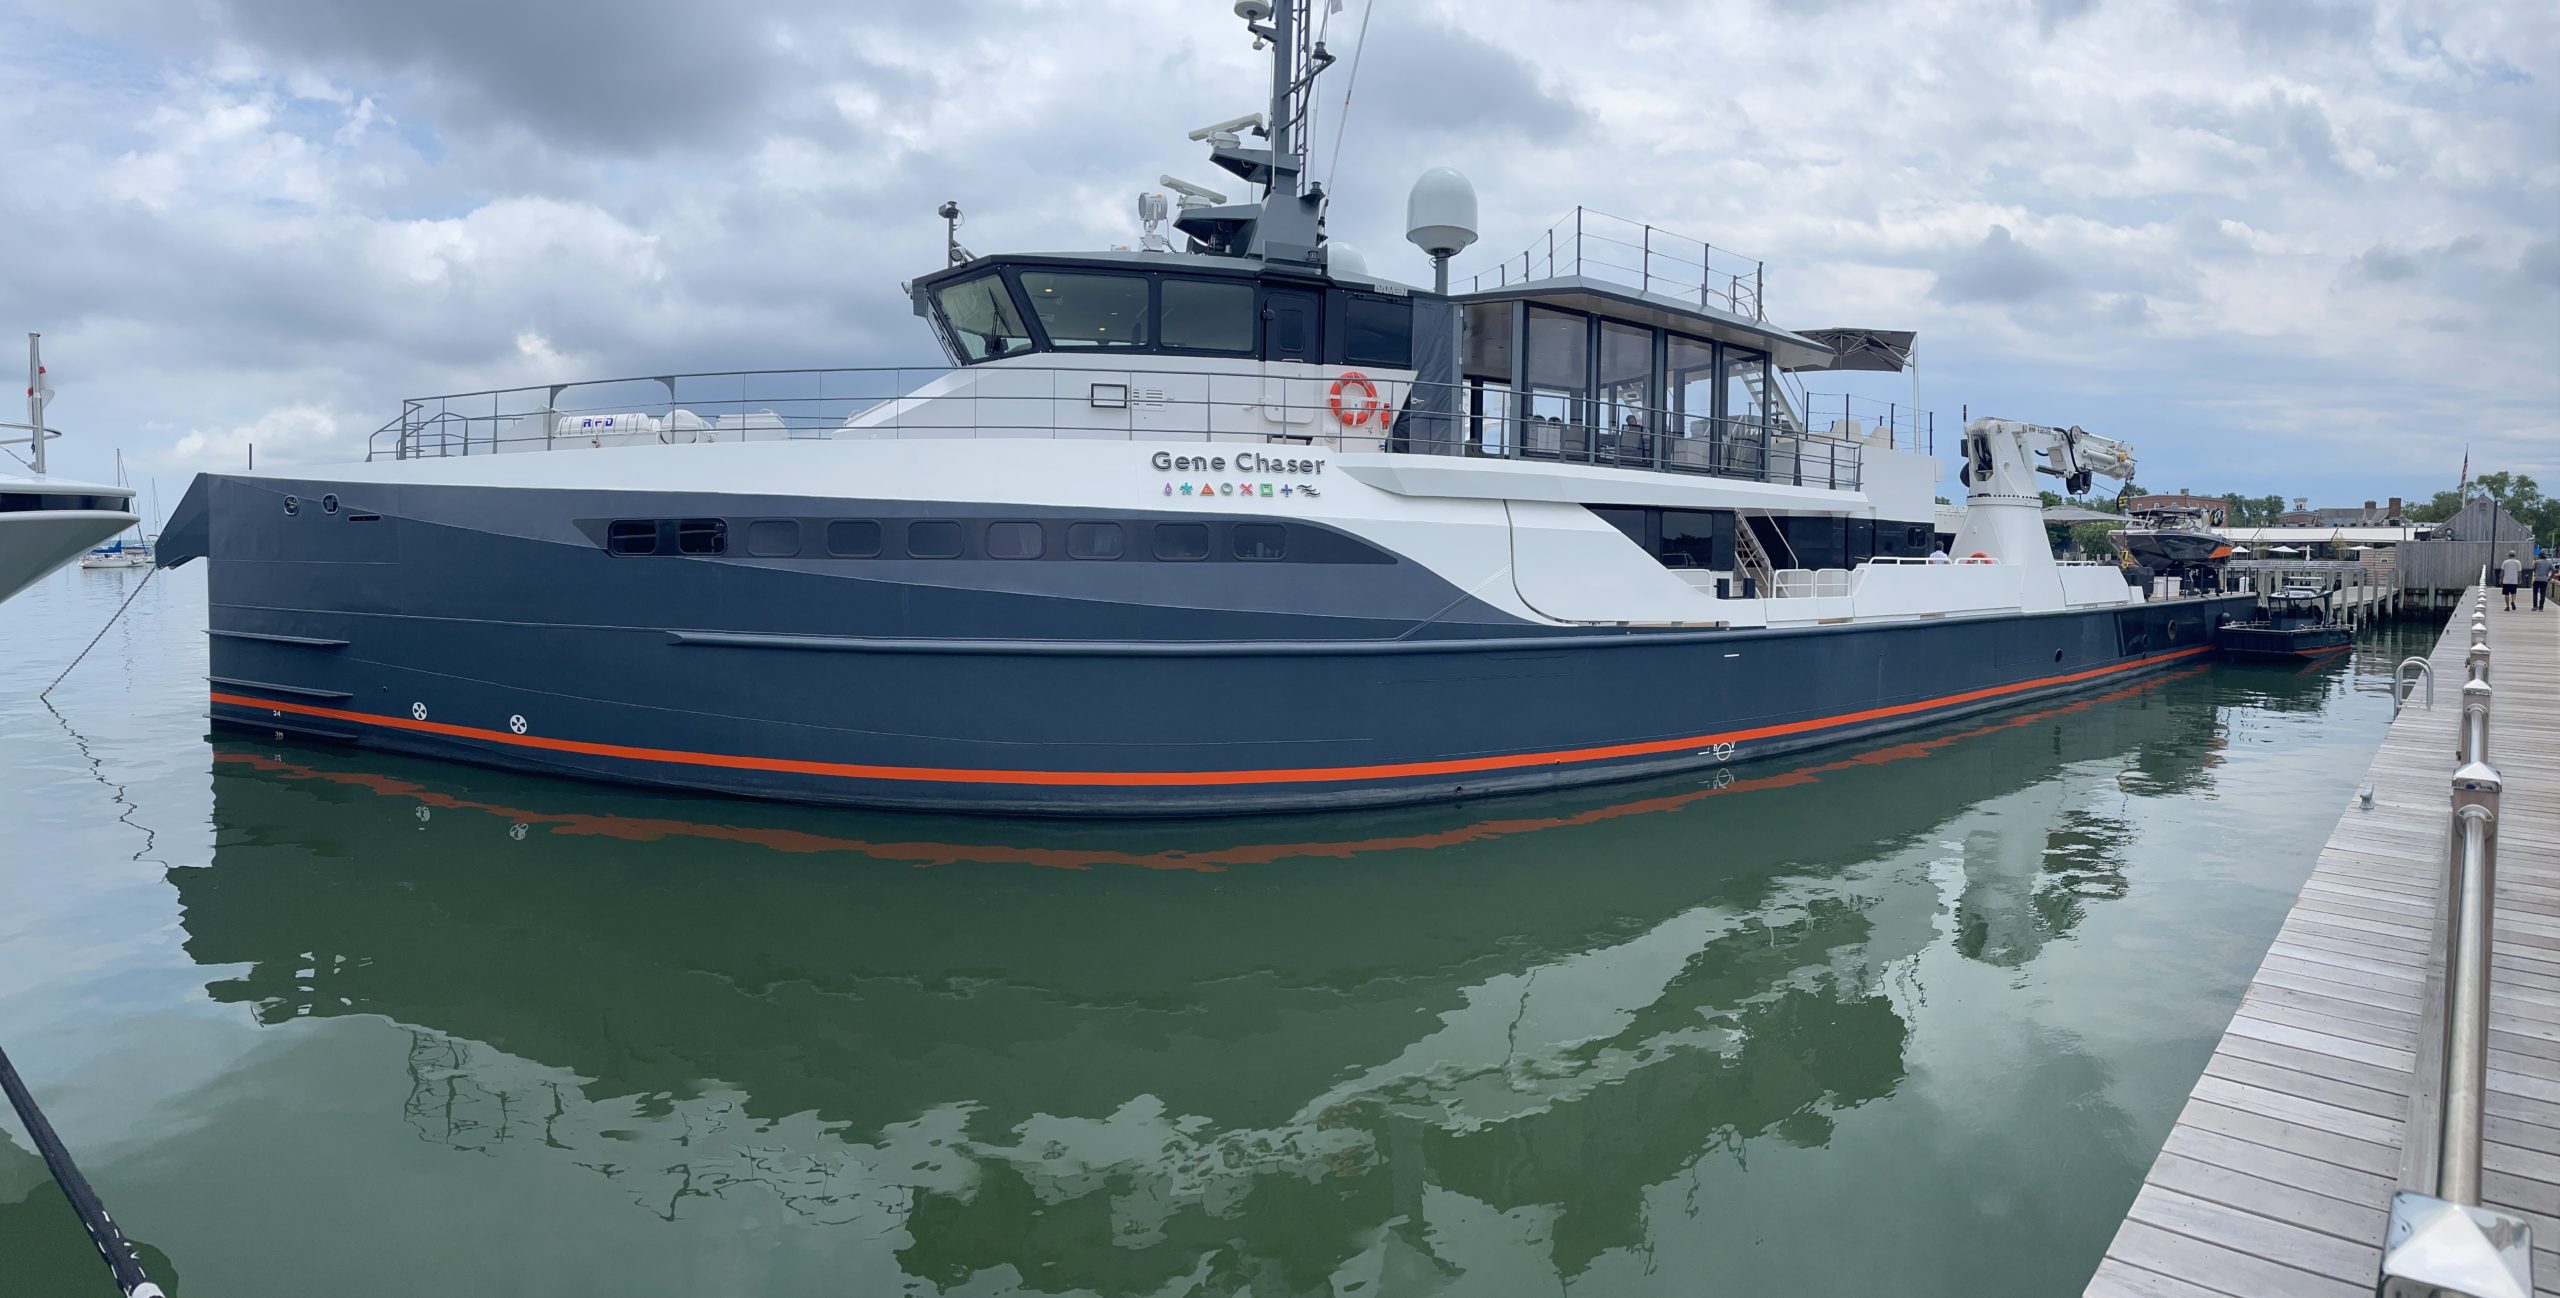 The Gene Chaser, which is moored in Sag Harbor this week, was set up by owner by Jonathan Rothberg to be a floating scientific incubator for medical startups. The 180-foot yacht is outfitted with science labs, 3D-printers and gene sequencing machines, along with a plethora of recreational 